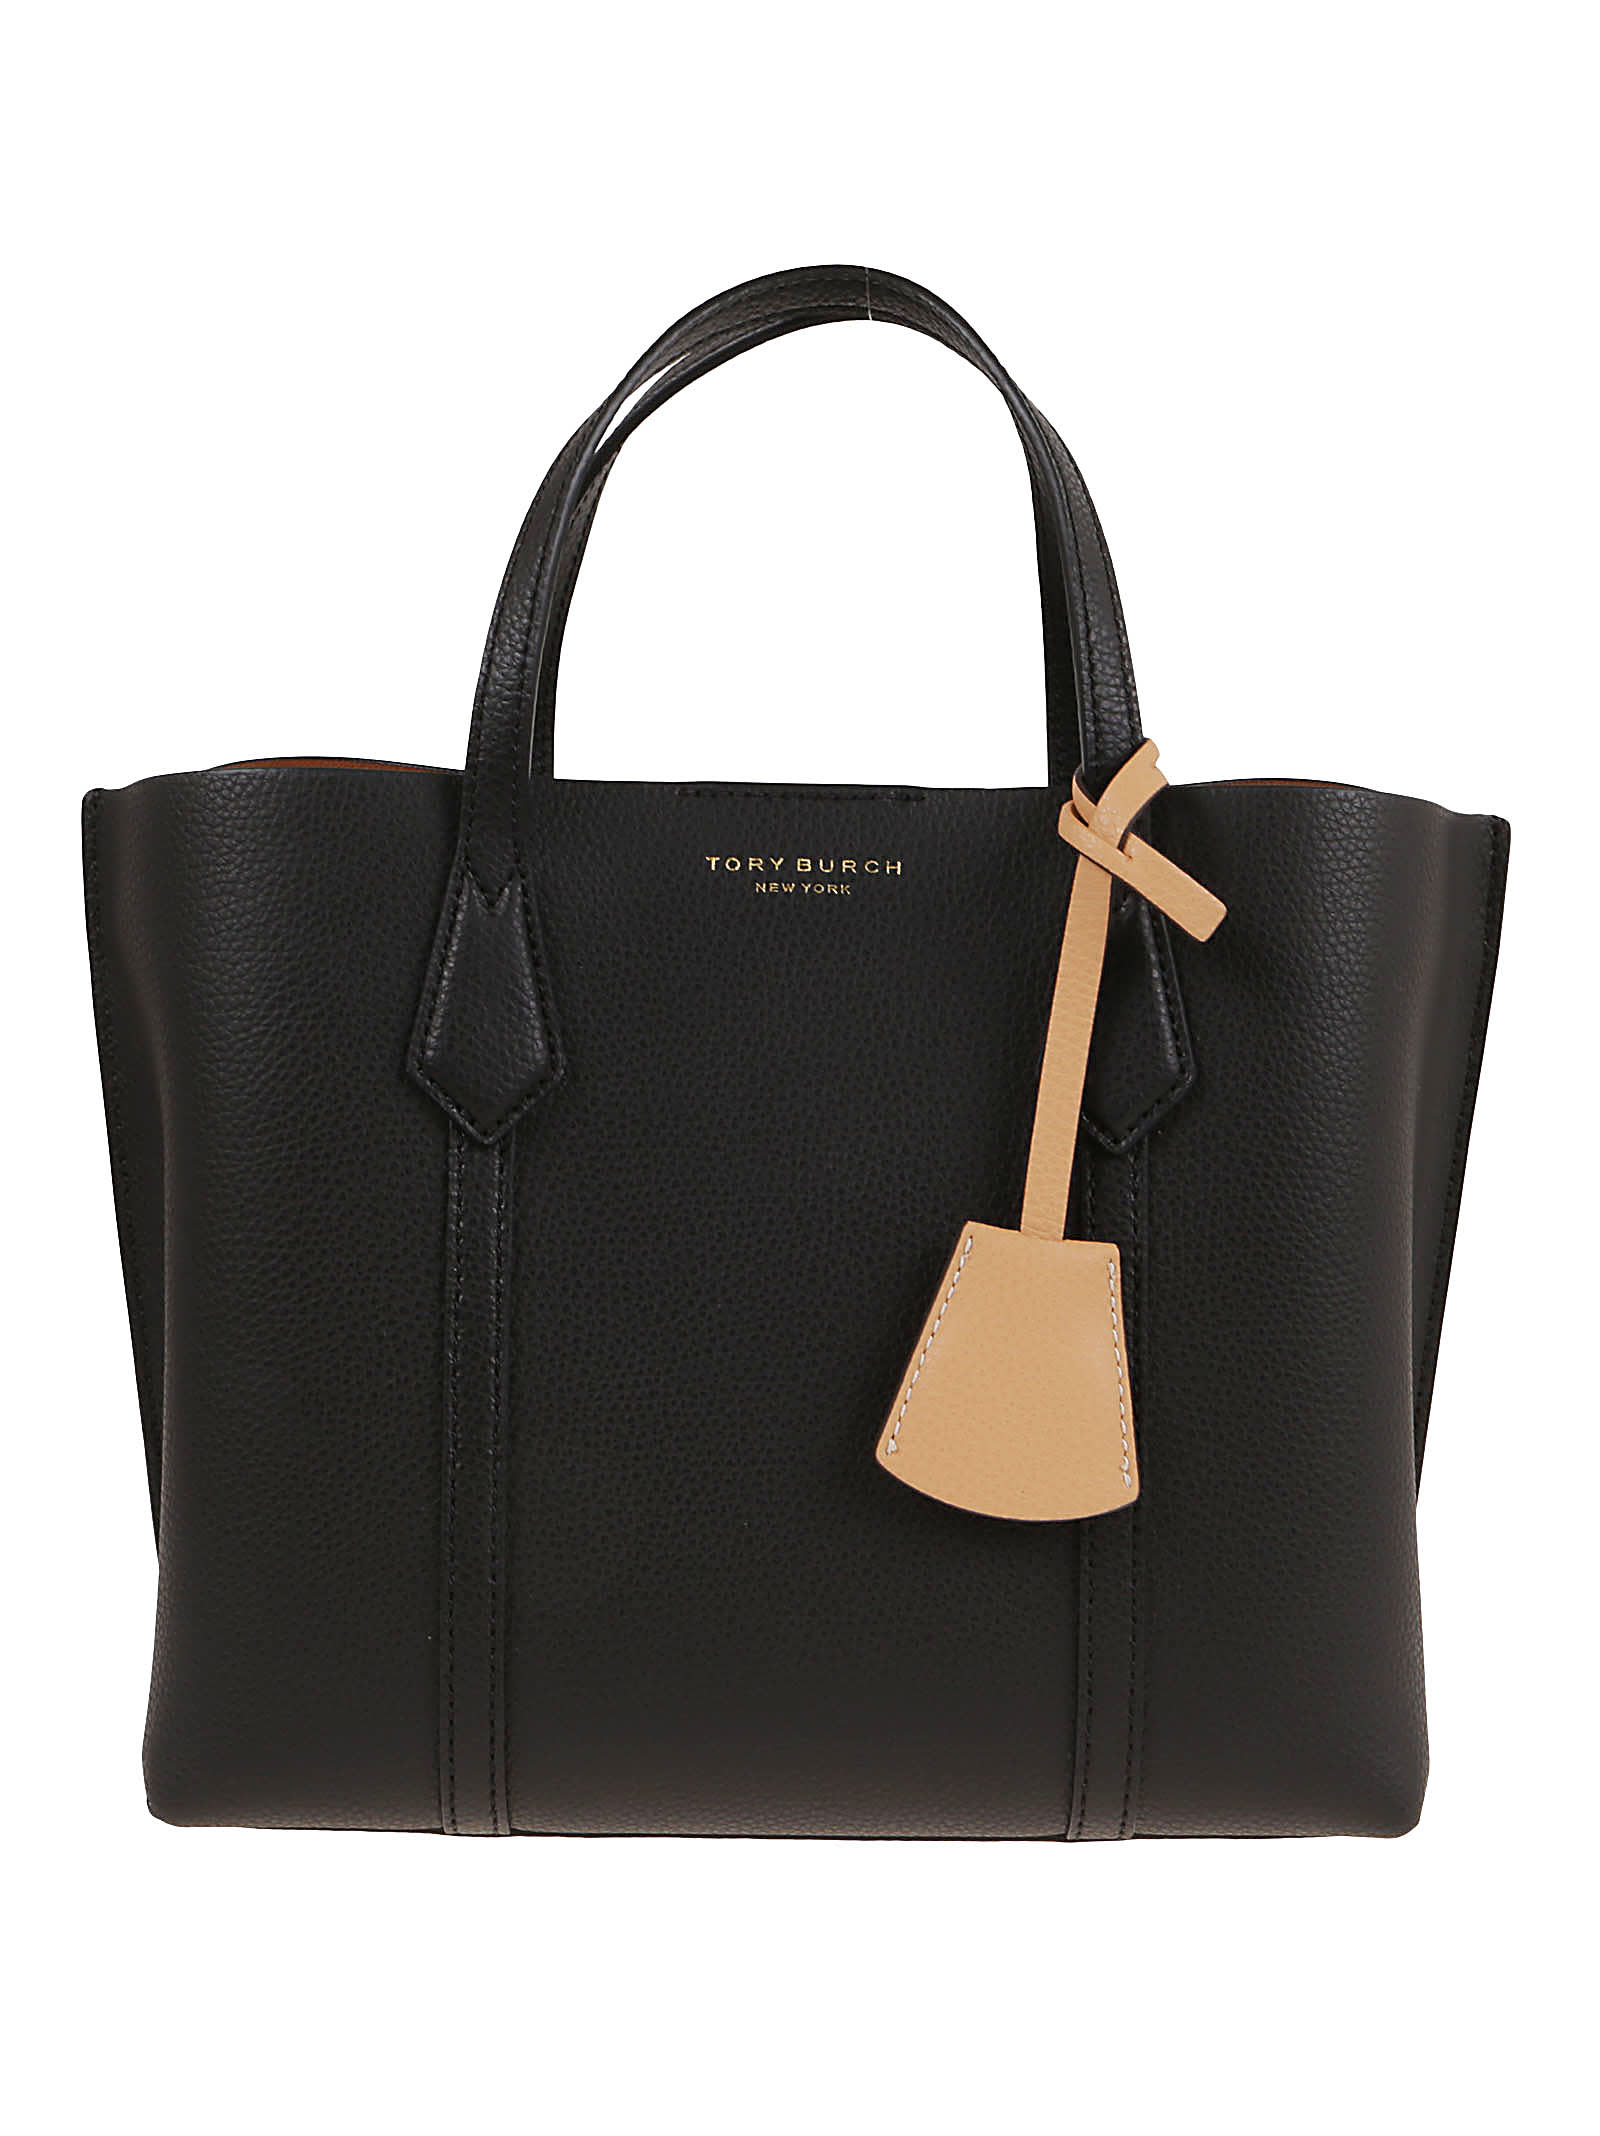 New* Tory Burch PERRY SMALL TRIPLE-COMPARTMENT TOTE BAG